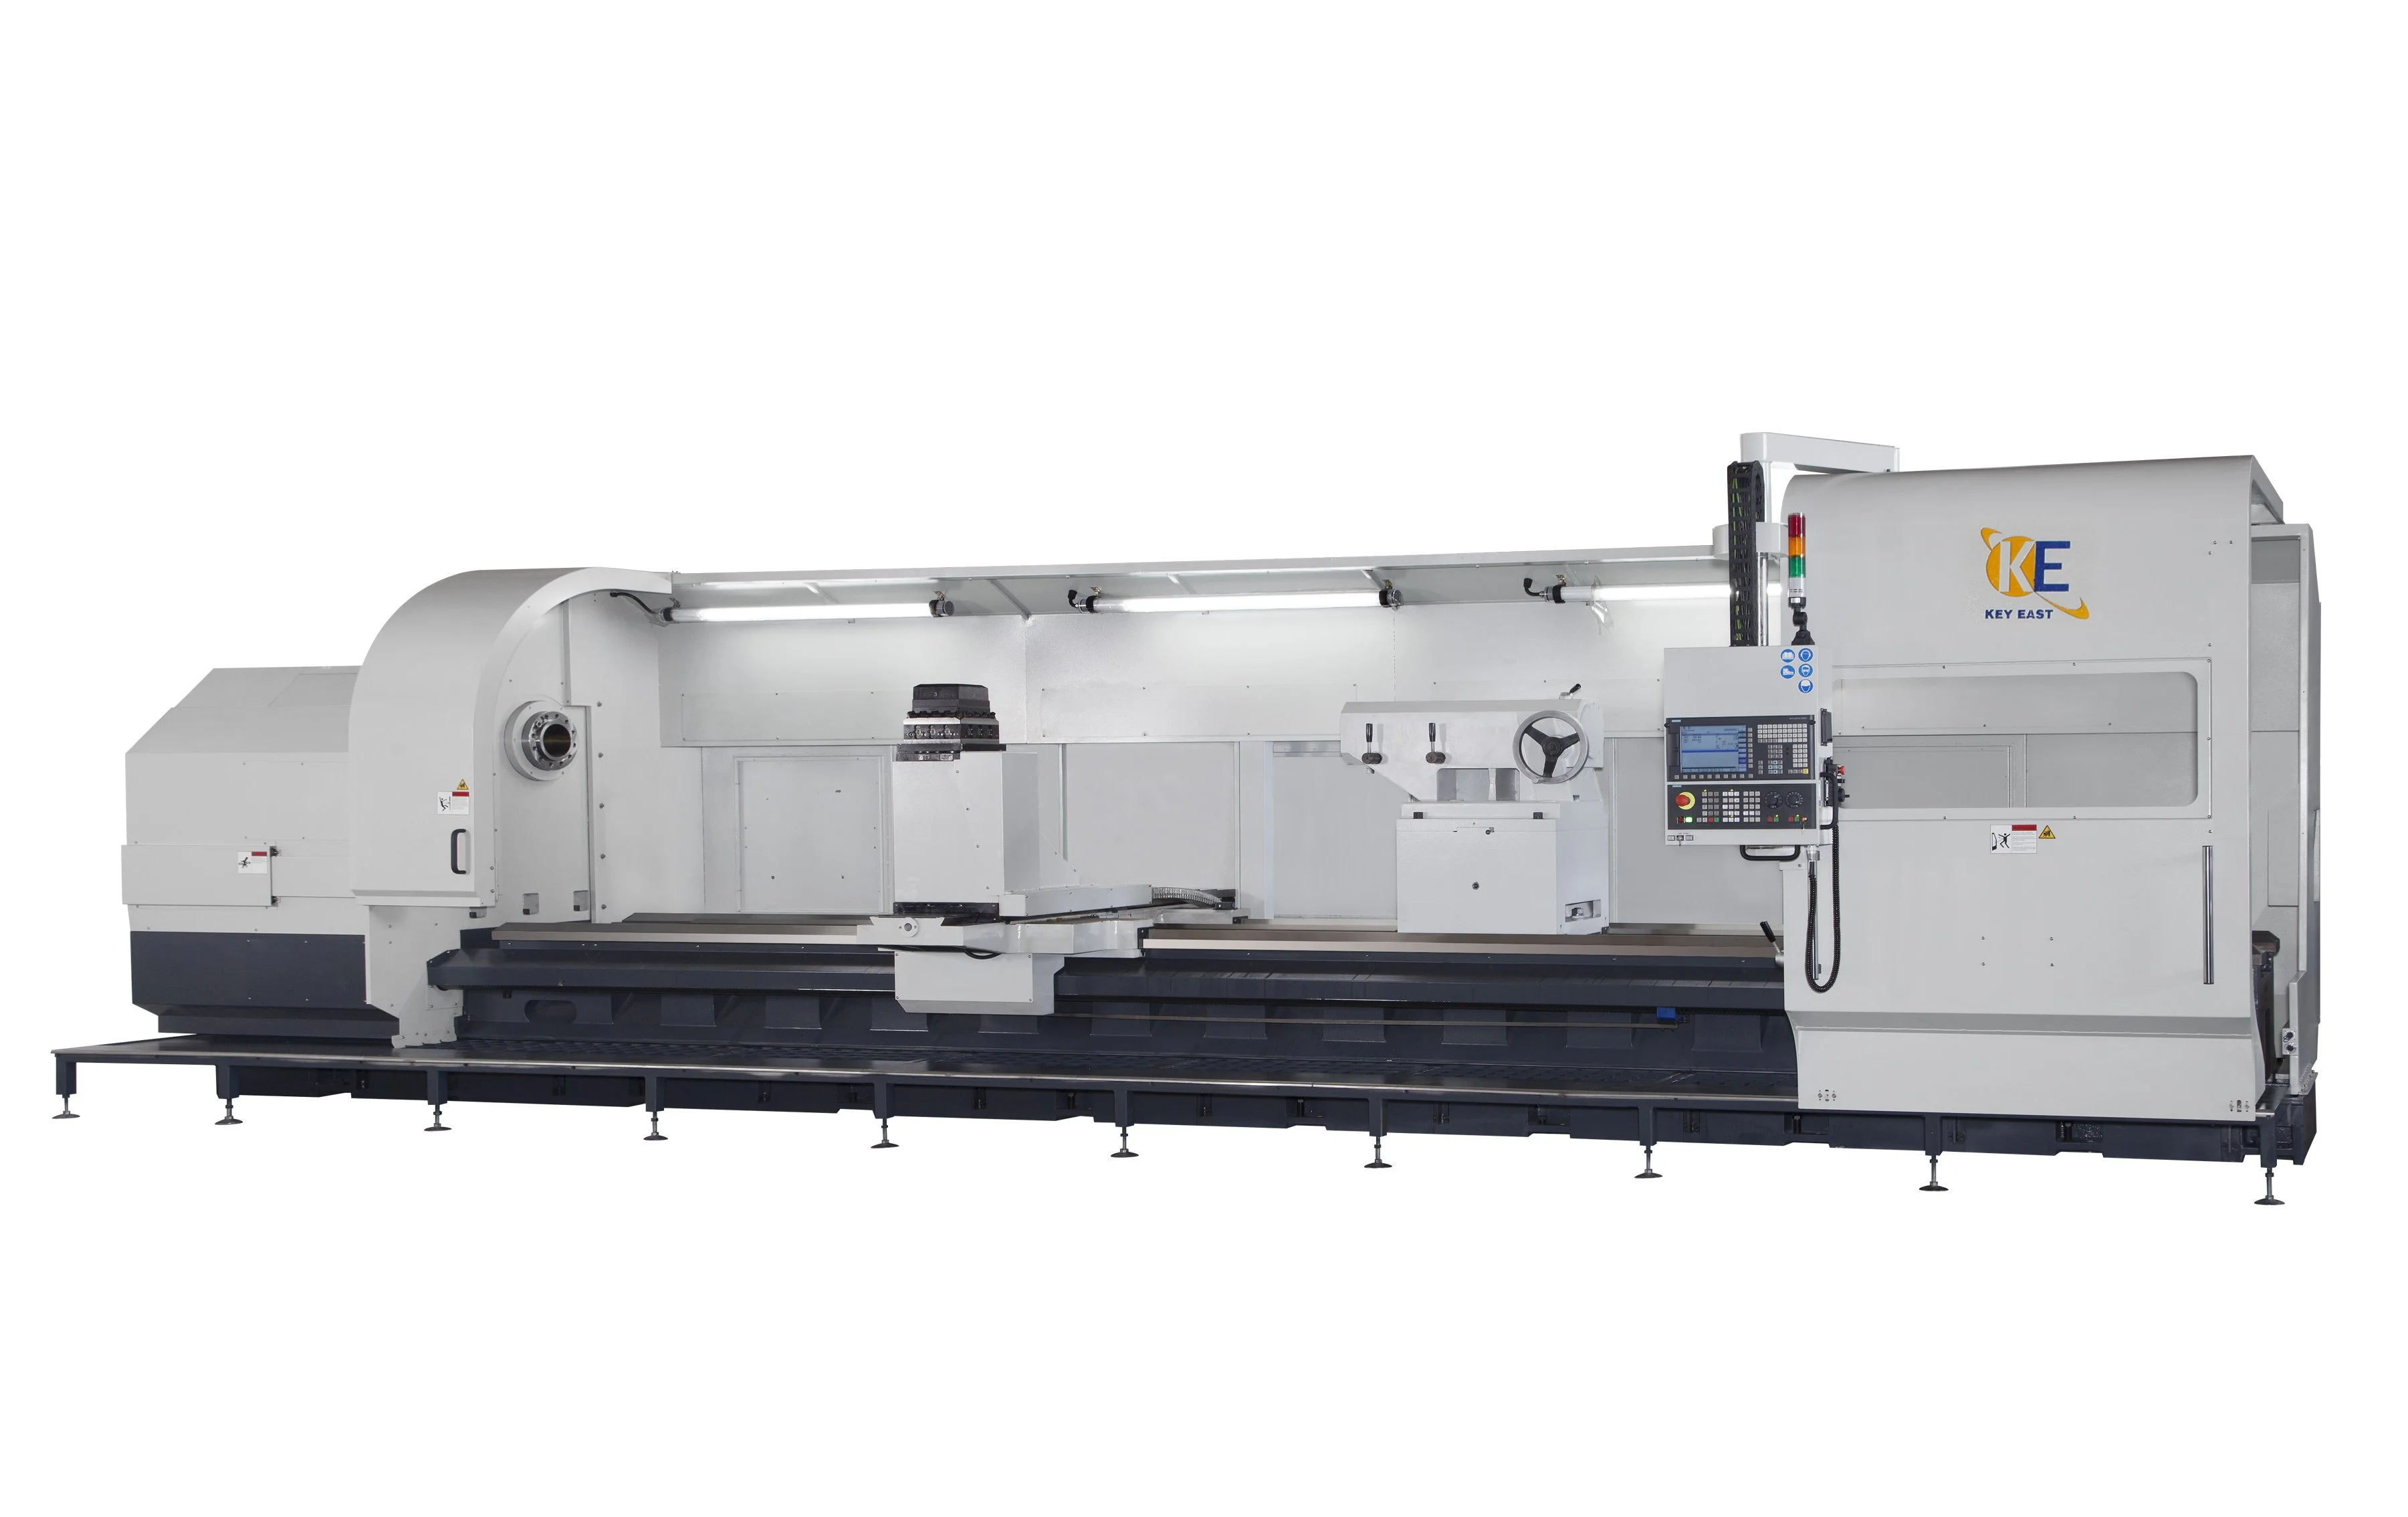 WHAT IS FLAT BED CNC LATHE?